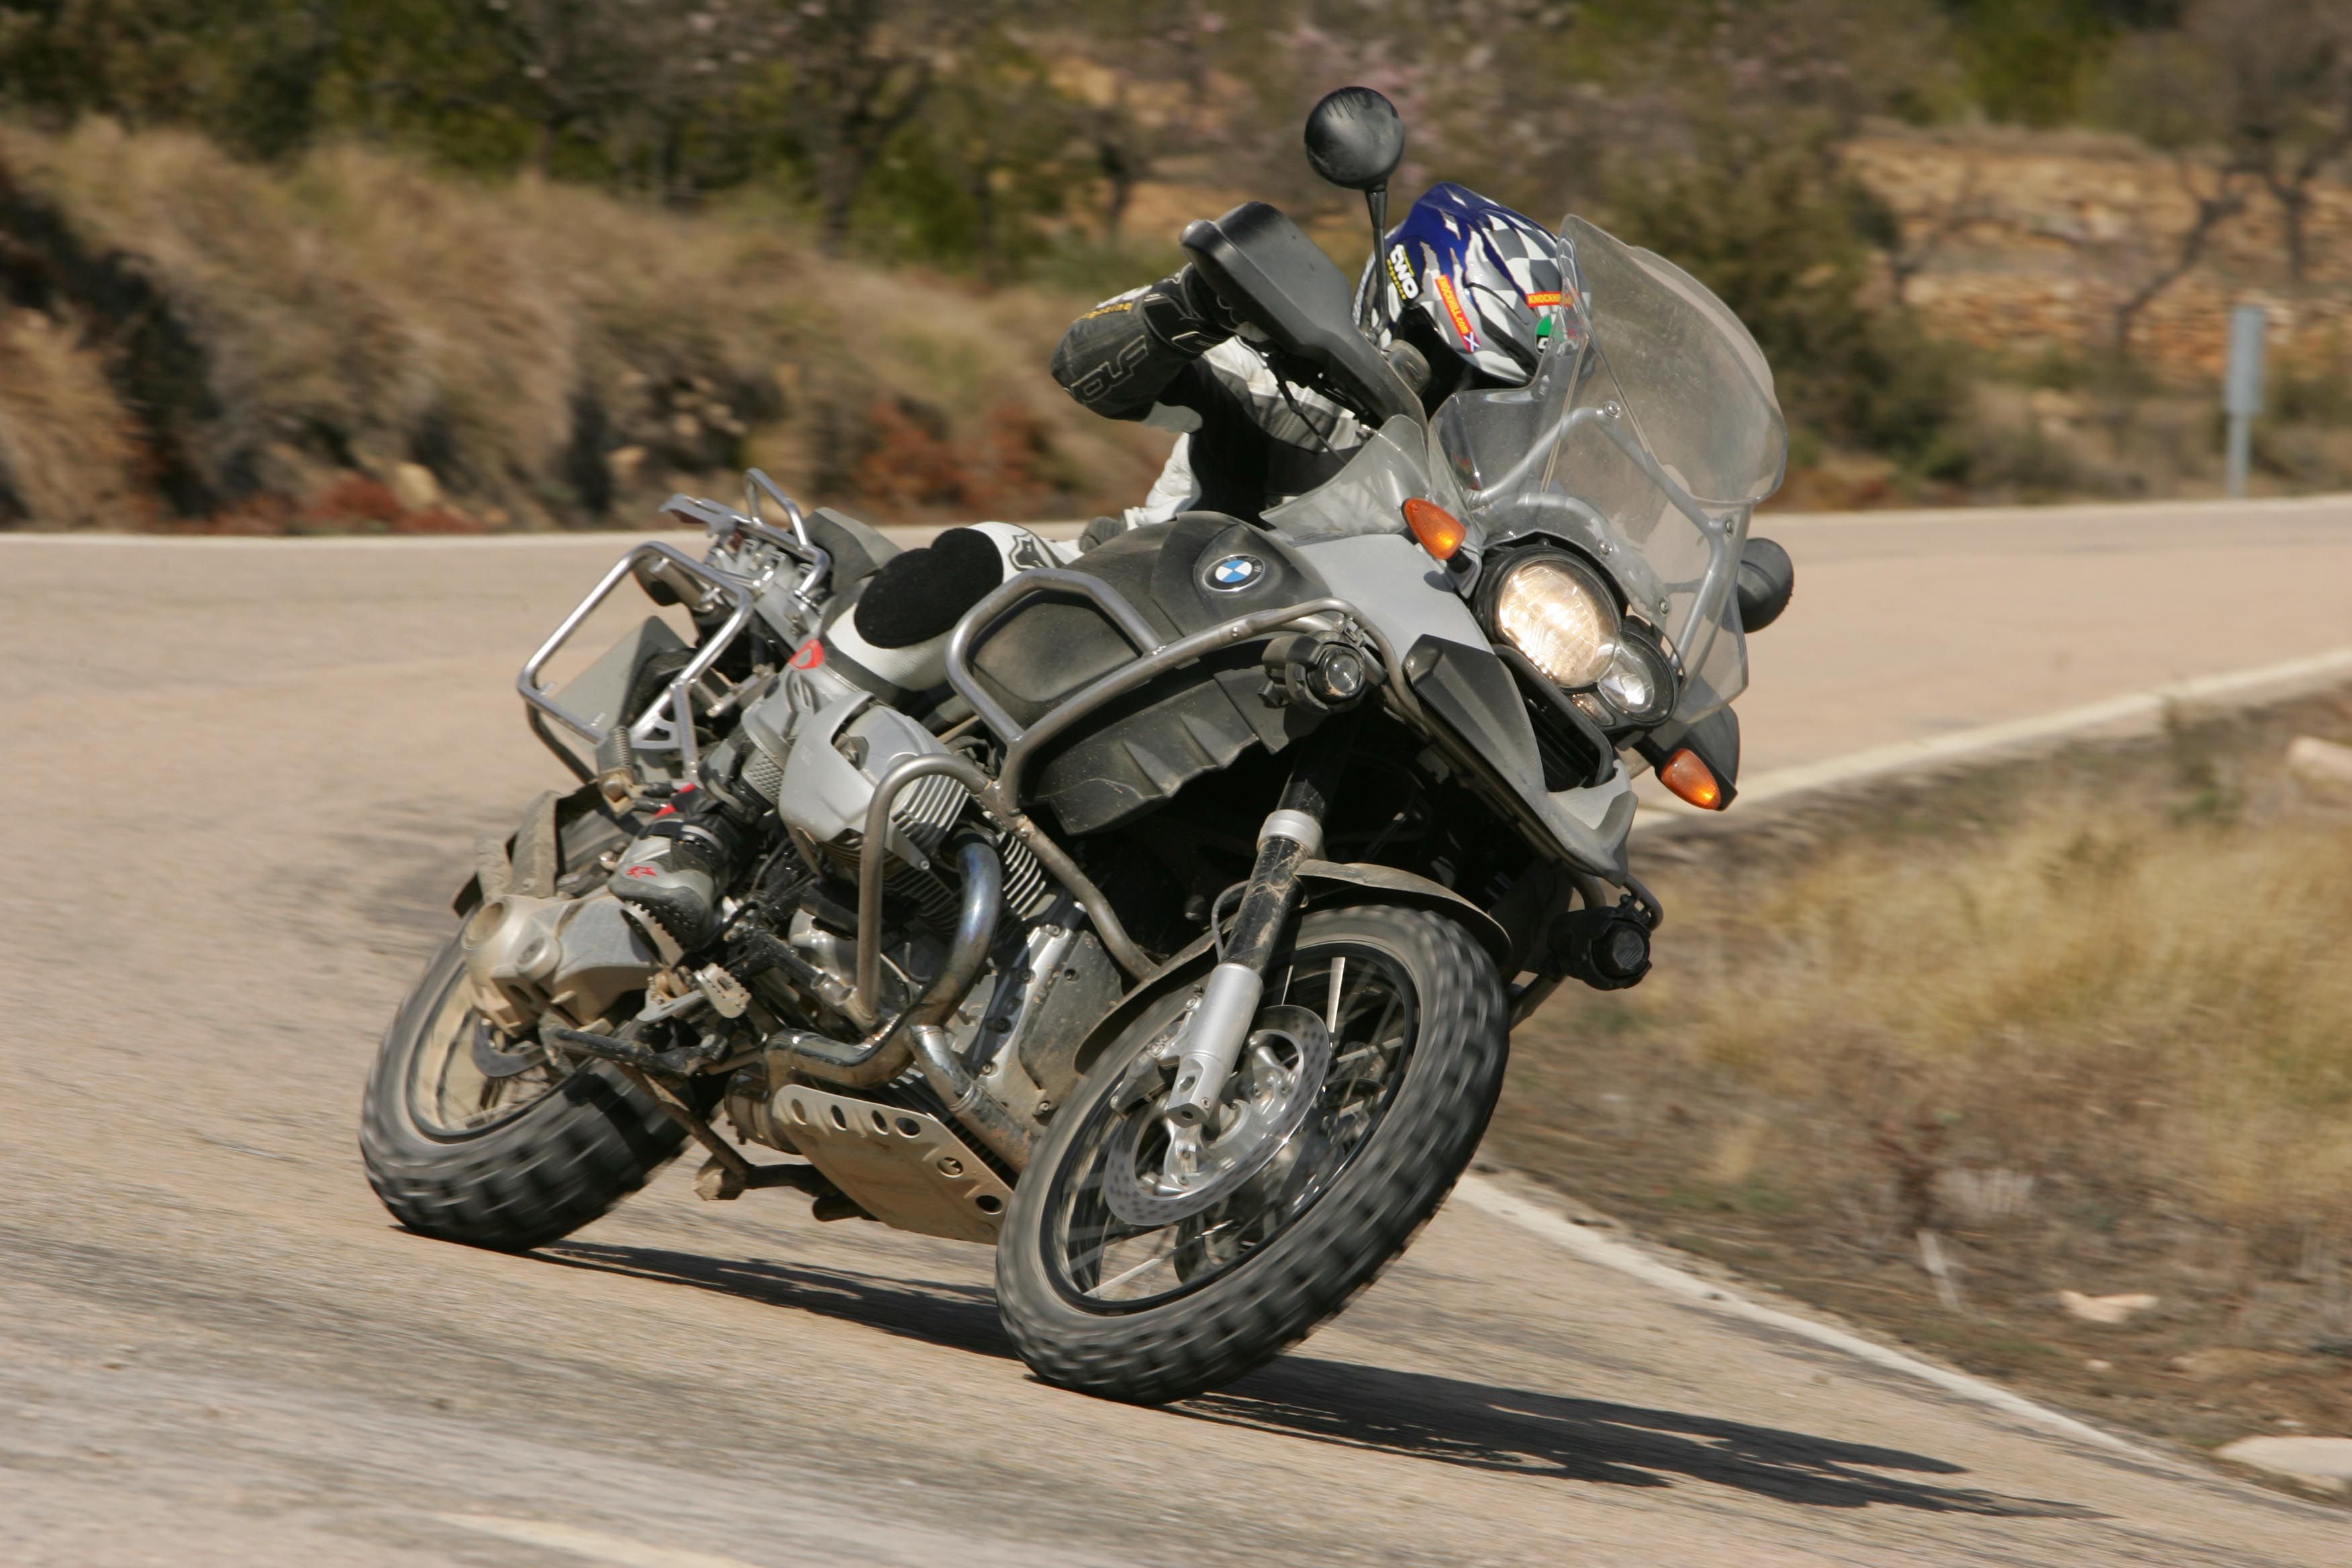 5 Best Motorcycles For Short People (5 That Can Accommodate A Giant)